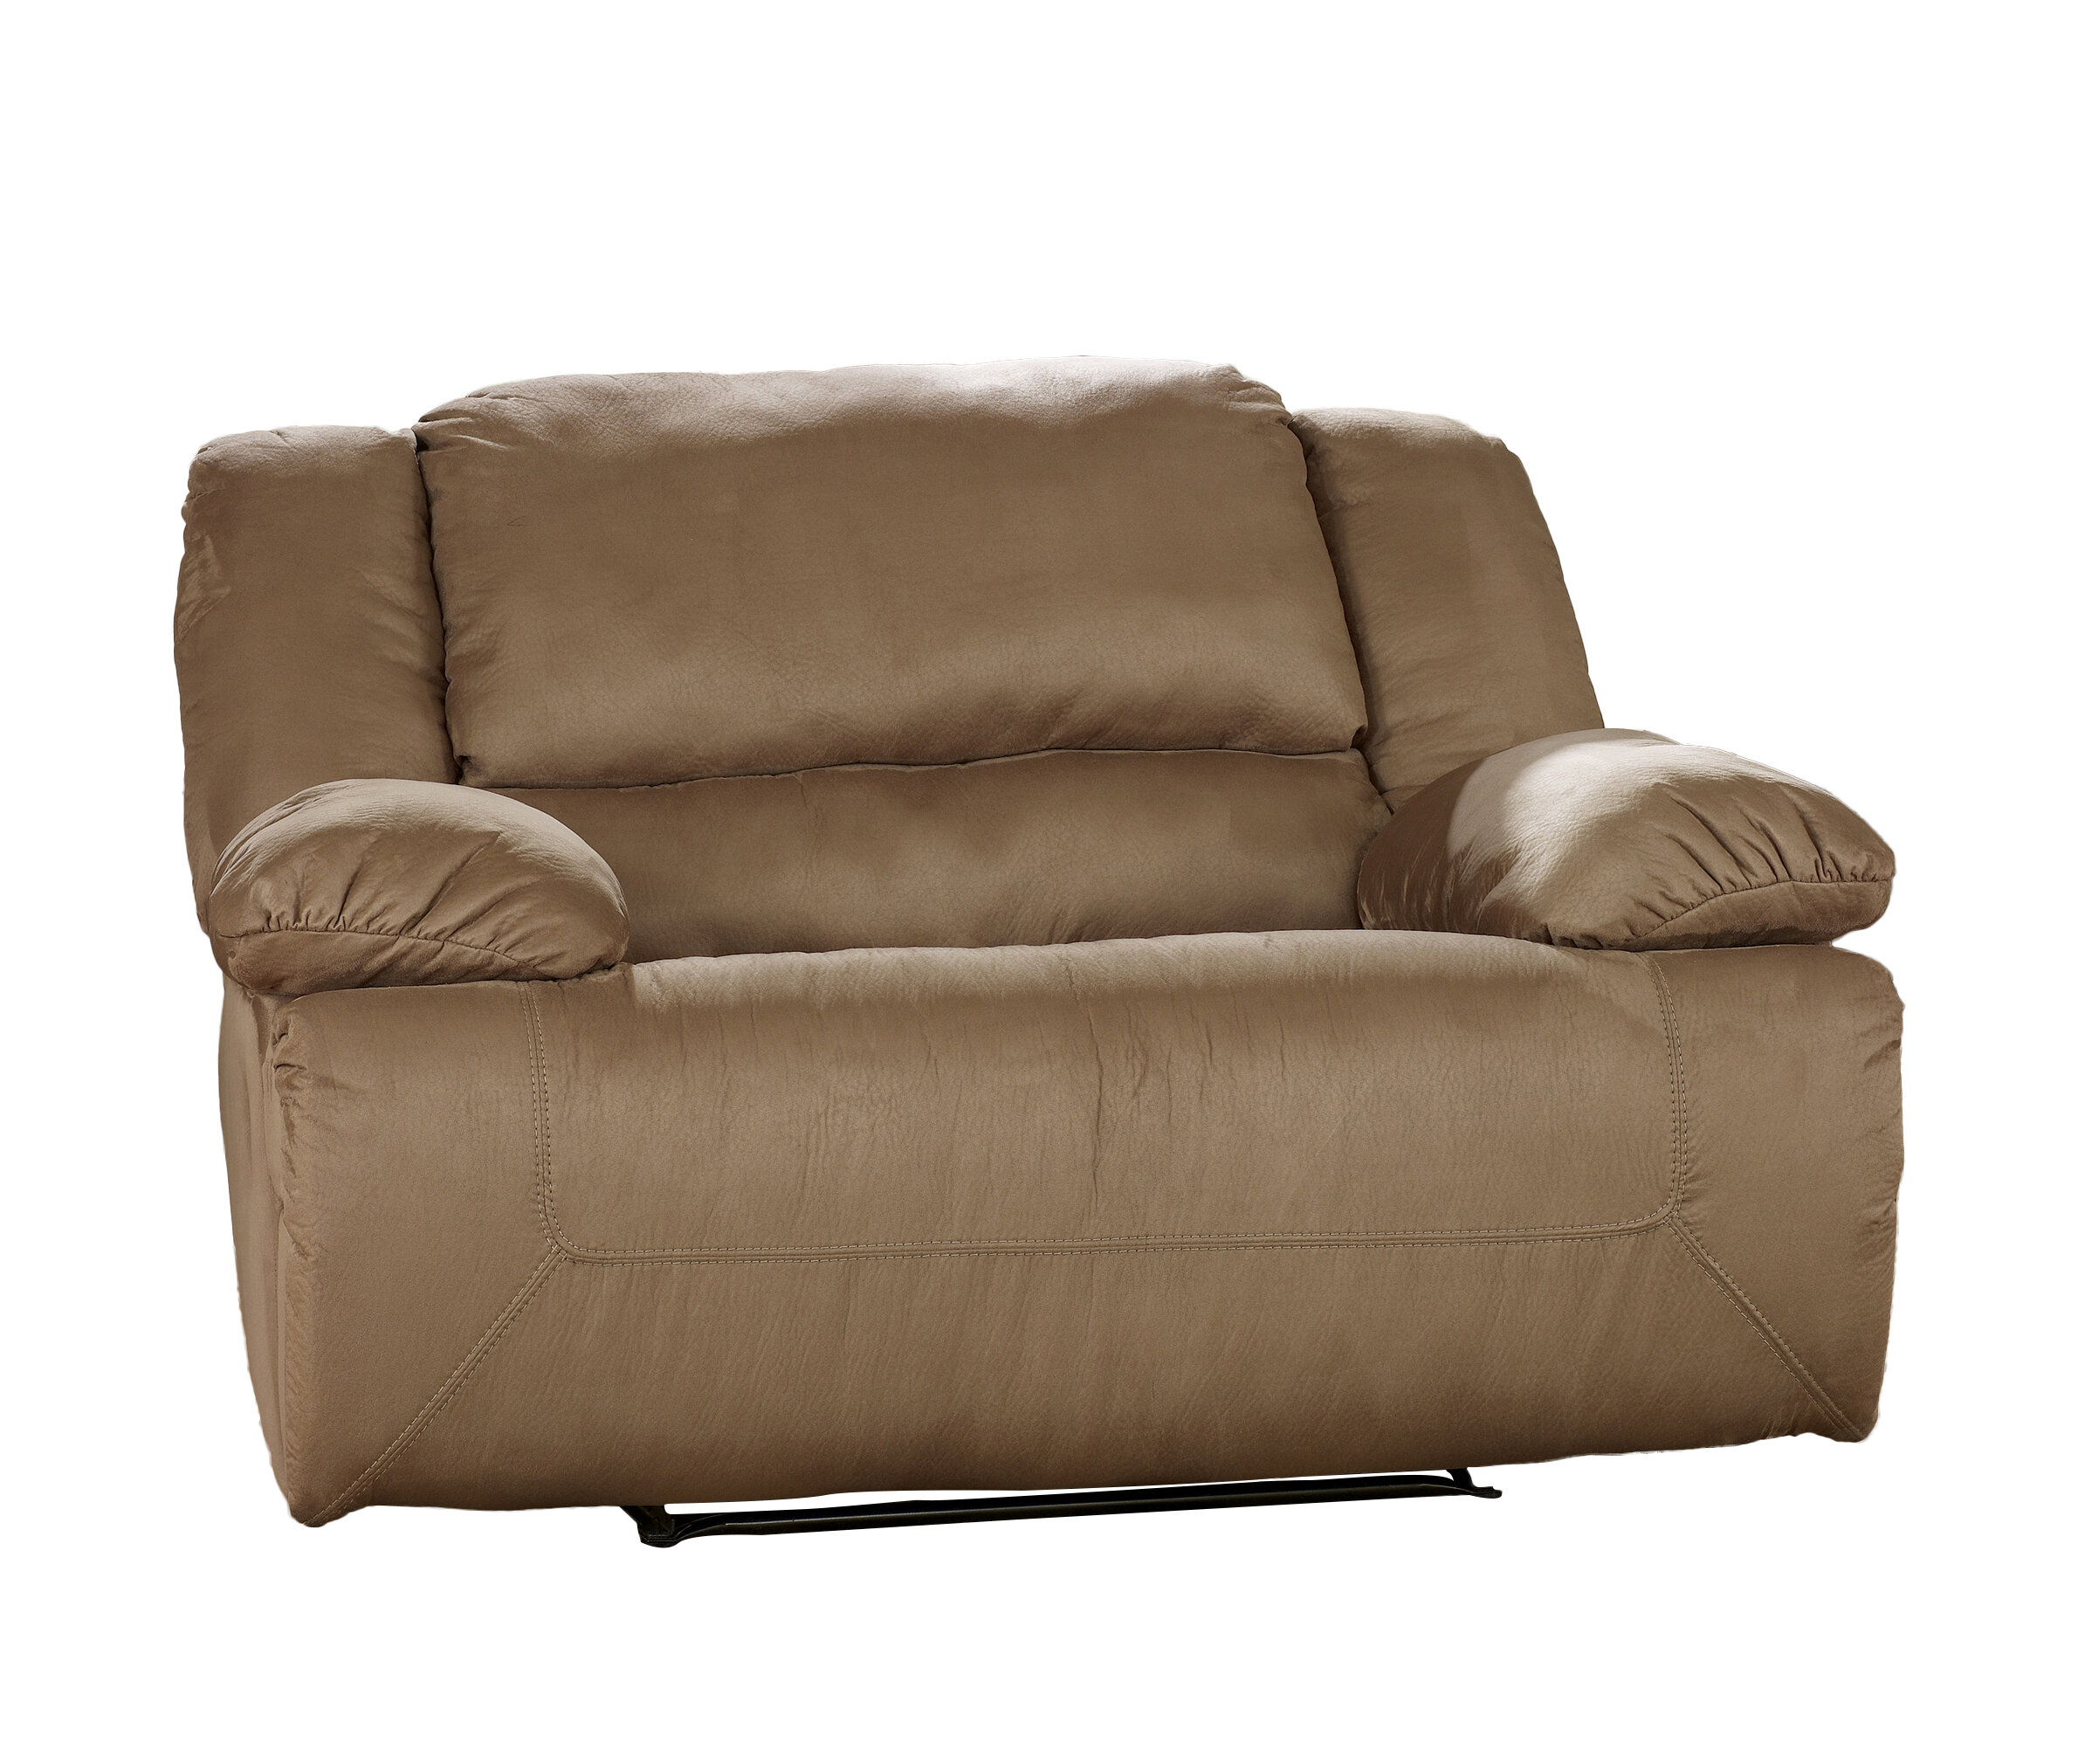 Double wide recliners 3